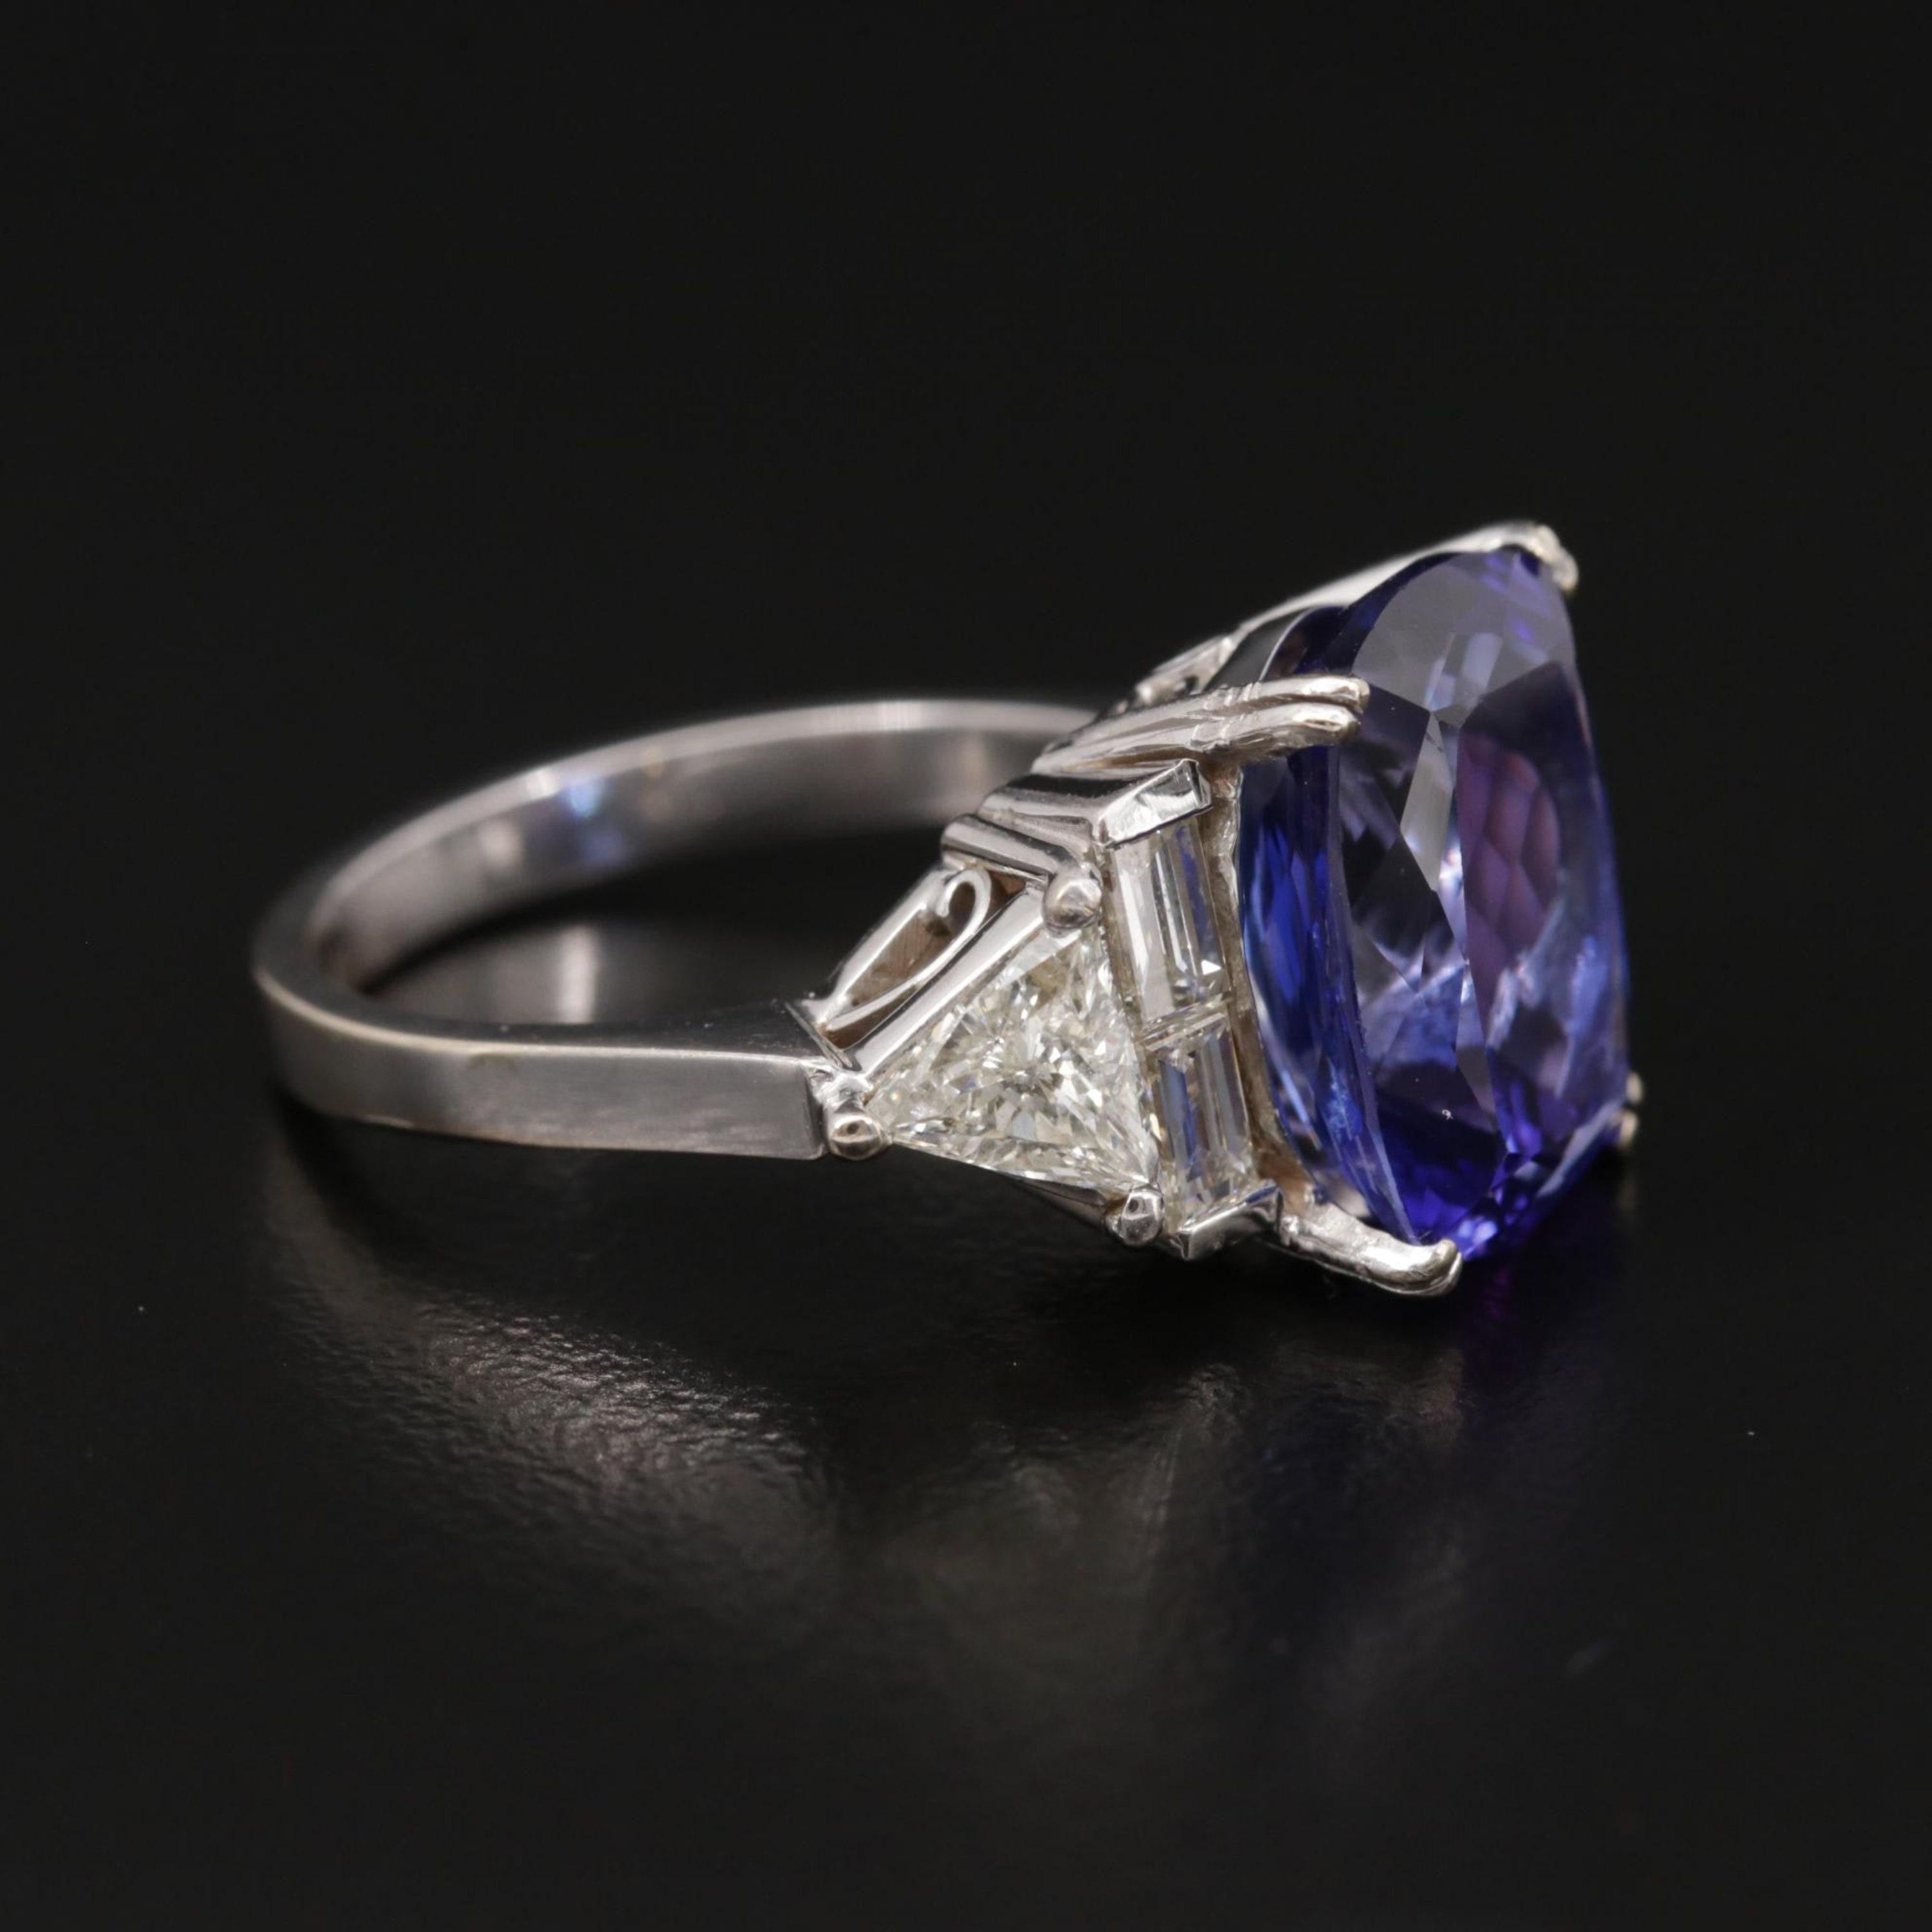 For Sale:  4 Carat Natural Sapphire Diamond Engagement Ring Set in 18K Gold, Cocktail Ring 3